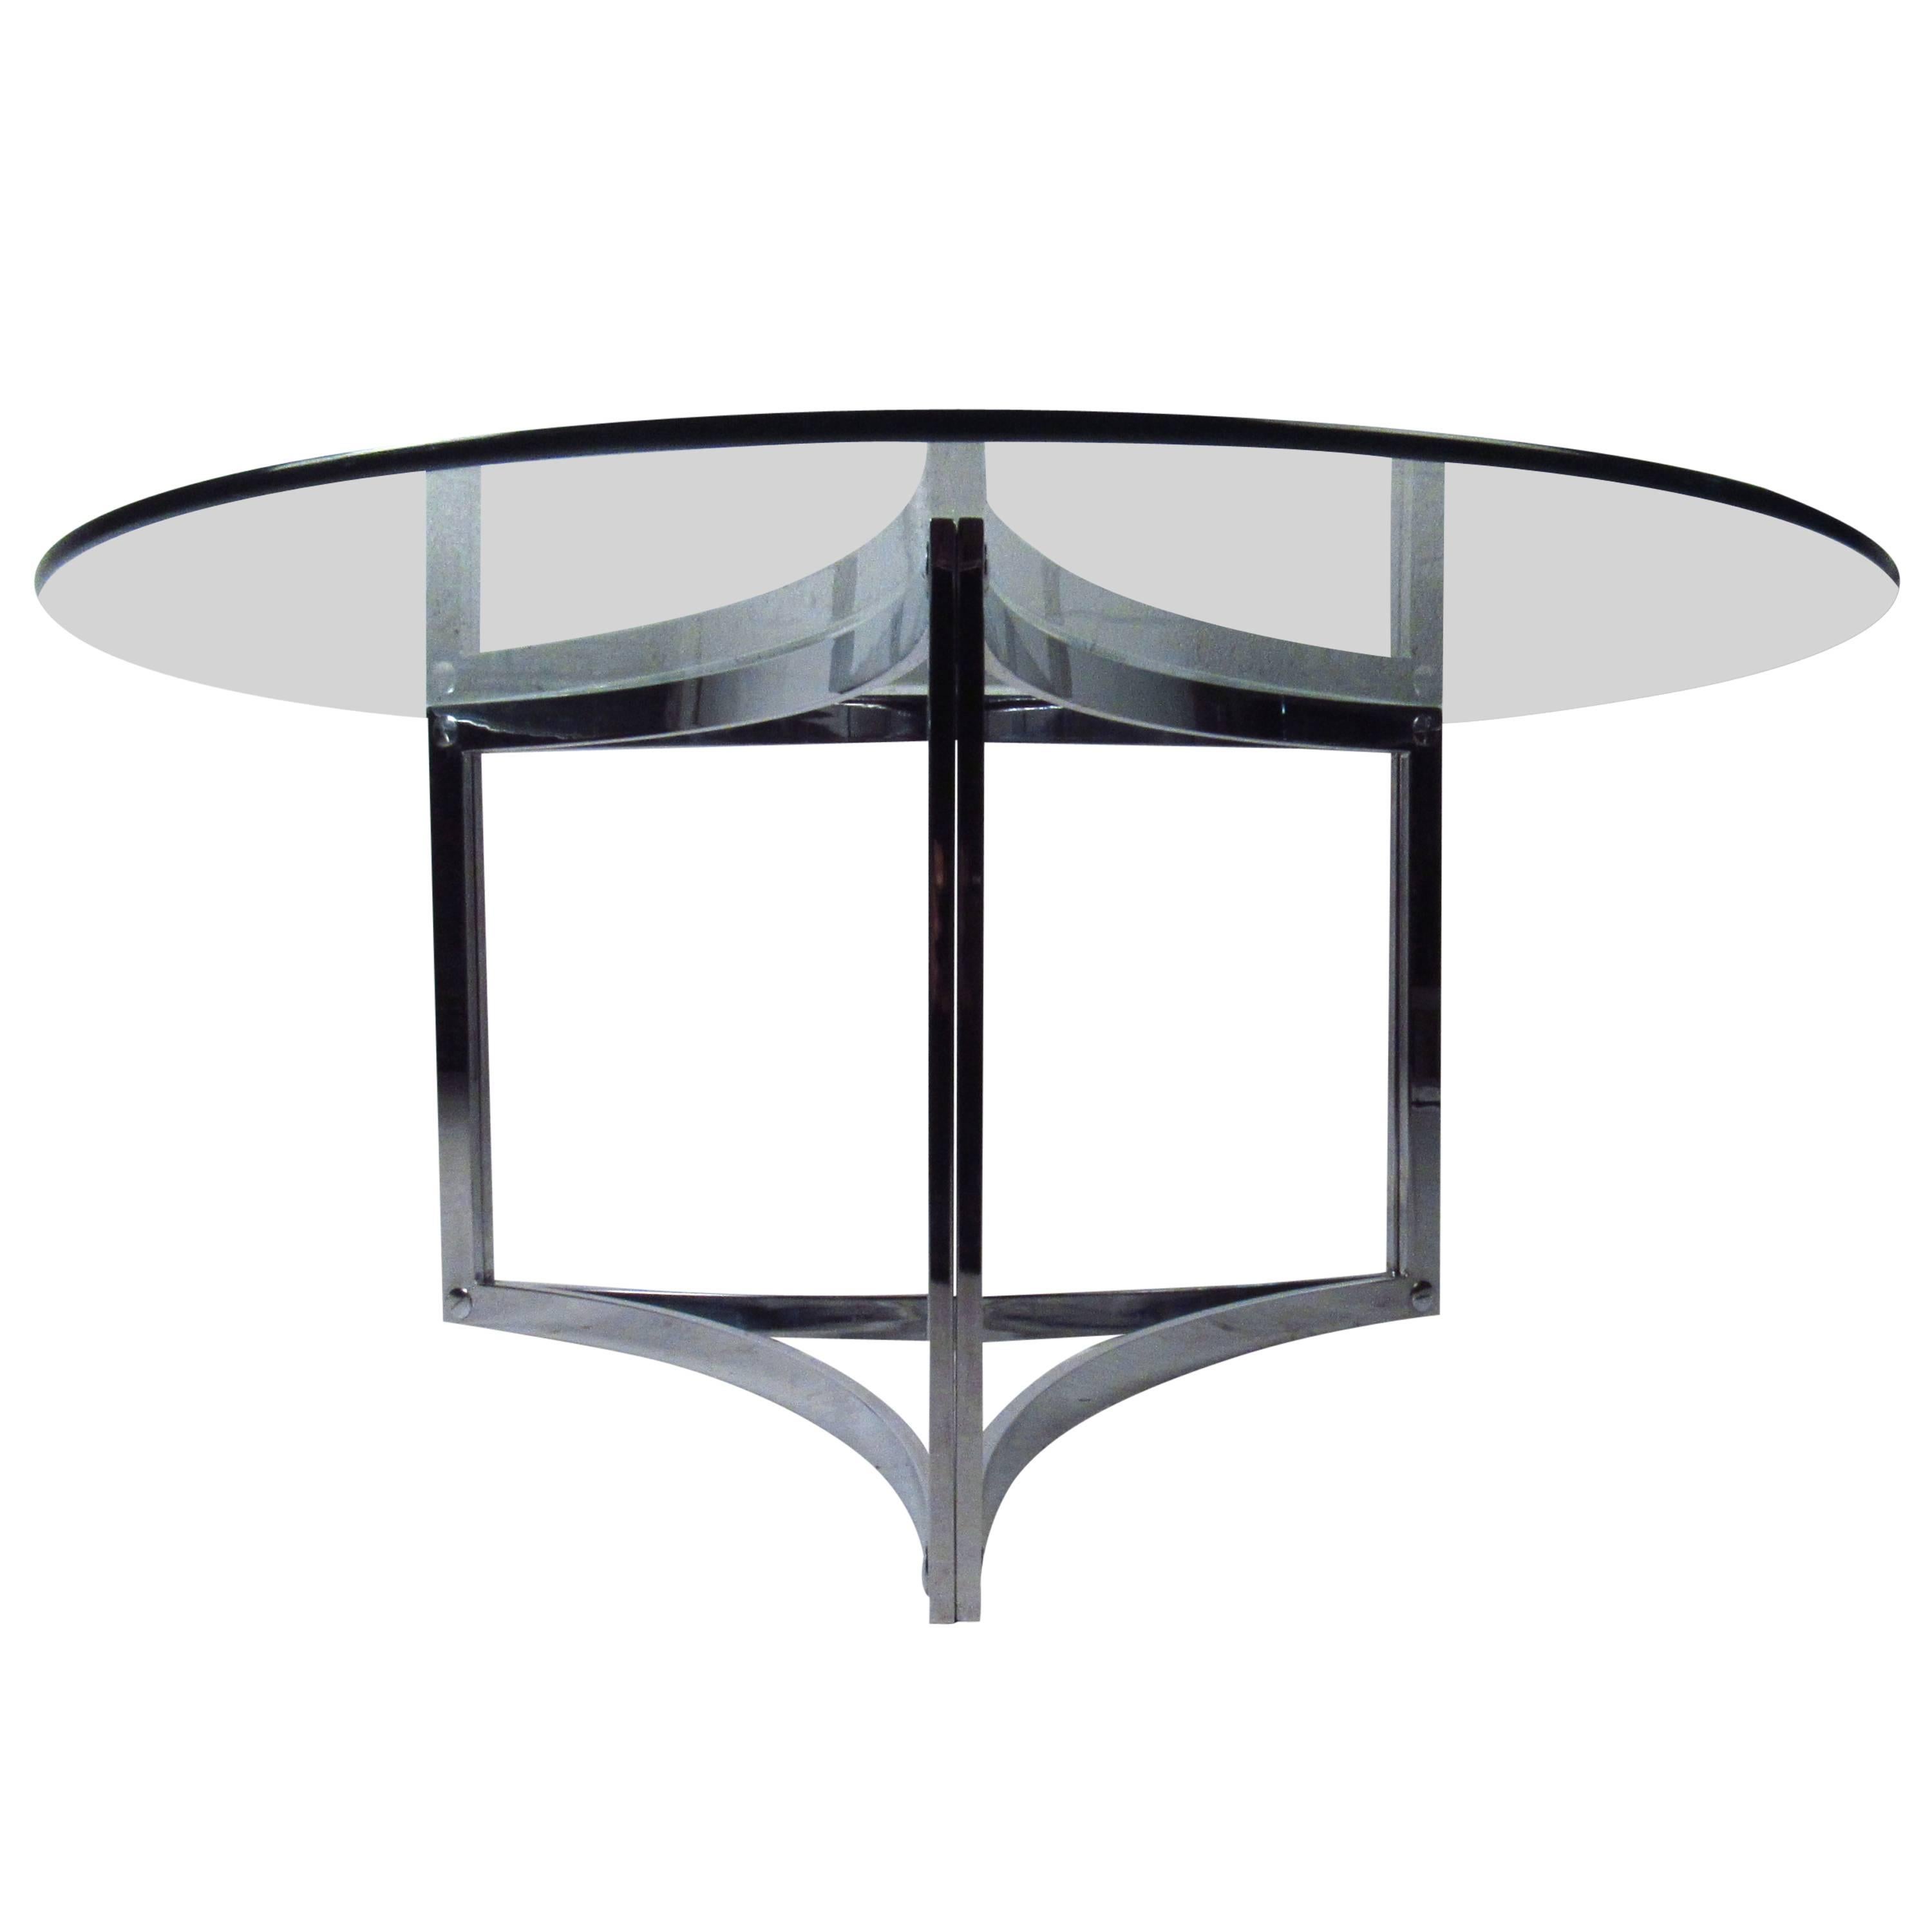 This gorgeous triangular cocktail table makes a simple yet stylish modern addition to any room. Wonderful chrome base with thick glass top make this a substantial center piece. Please confirm item location (NY or NJ).